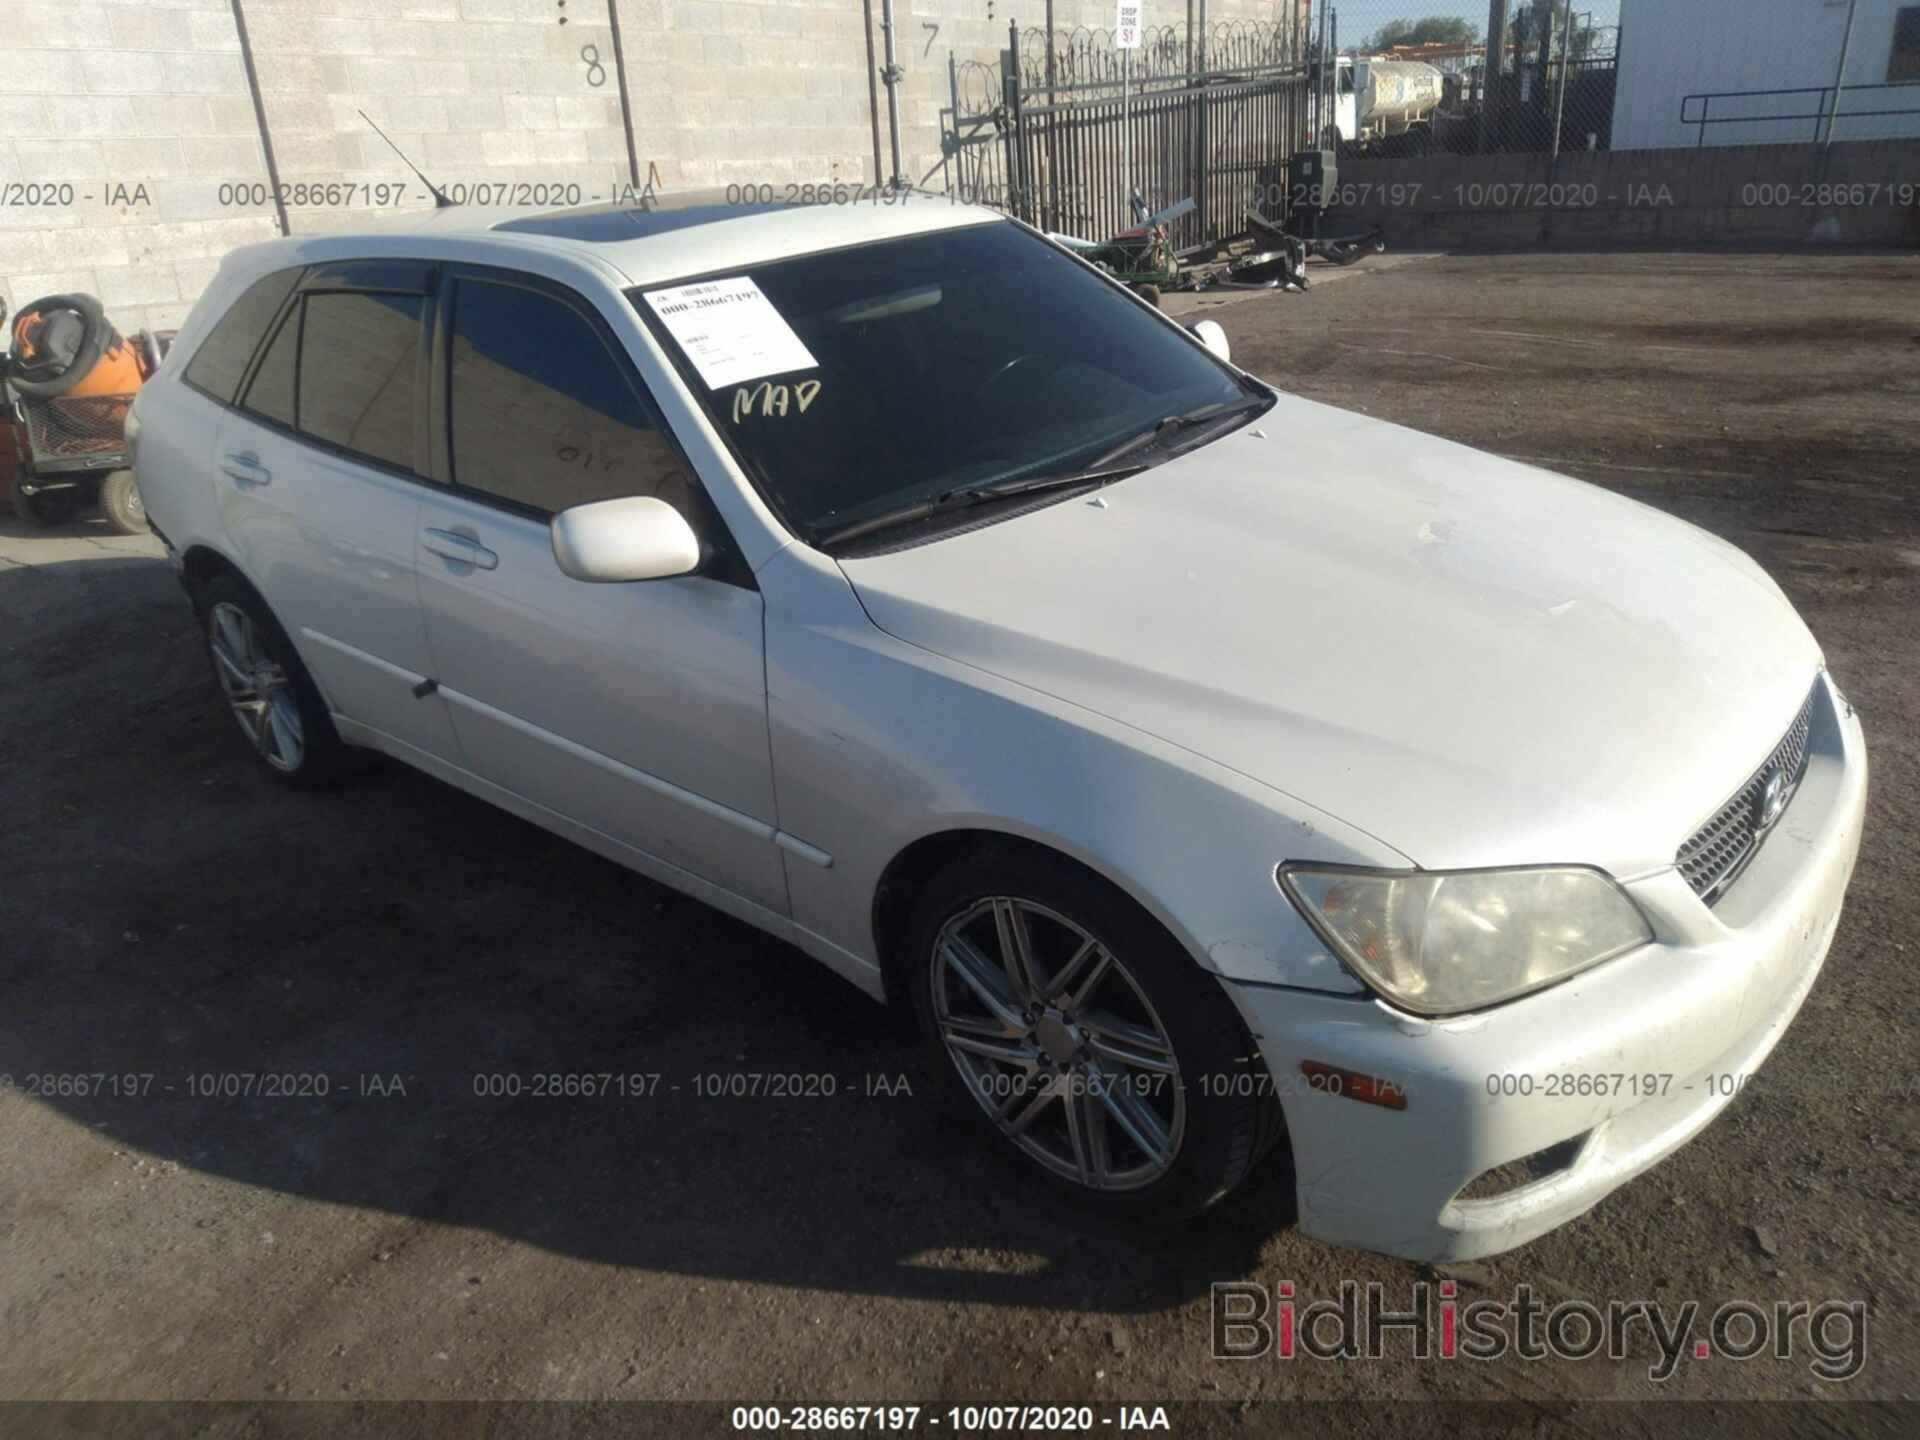 Photo JTHED192820040641 - LEXUS IS 300 2002